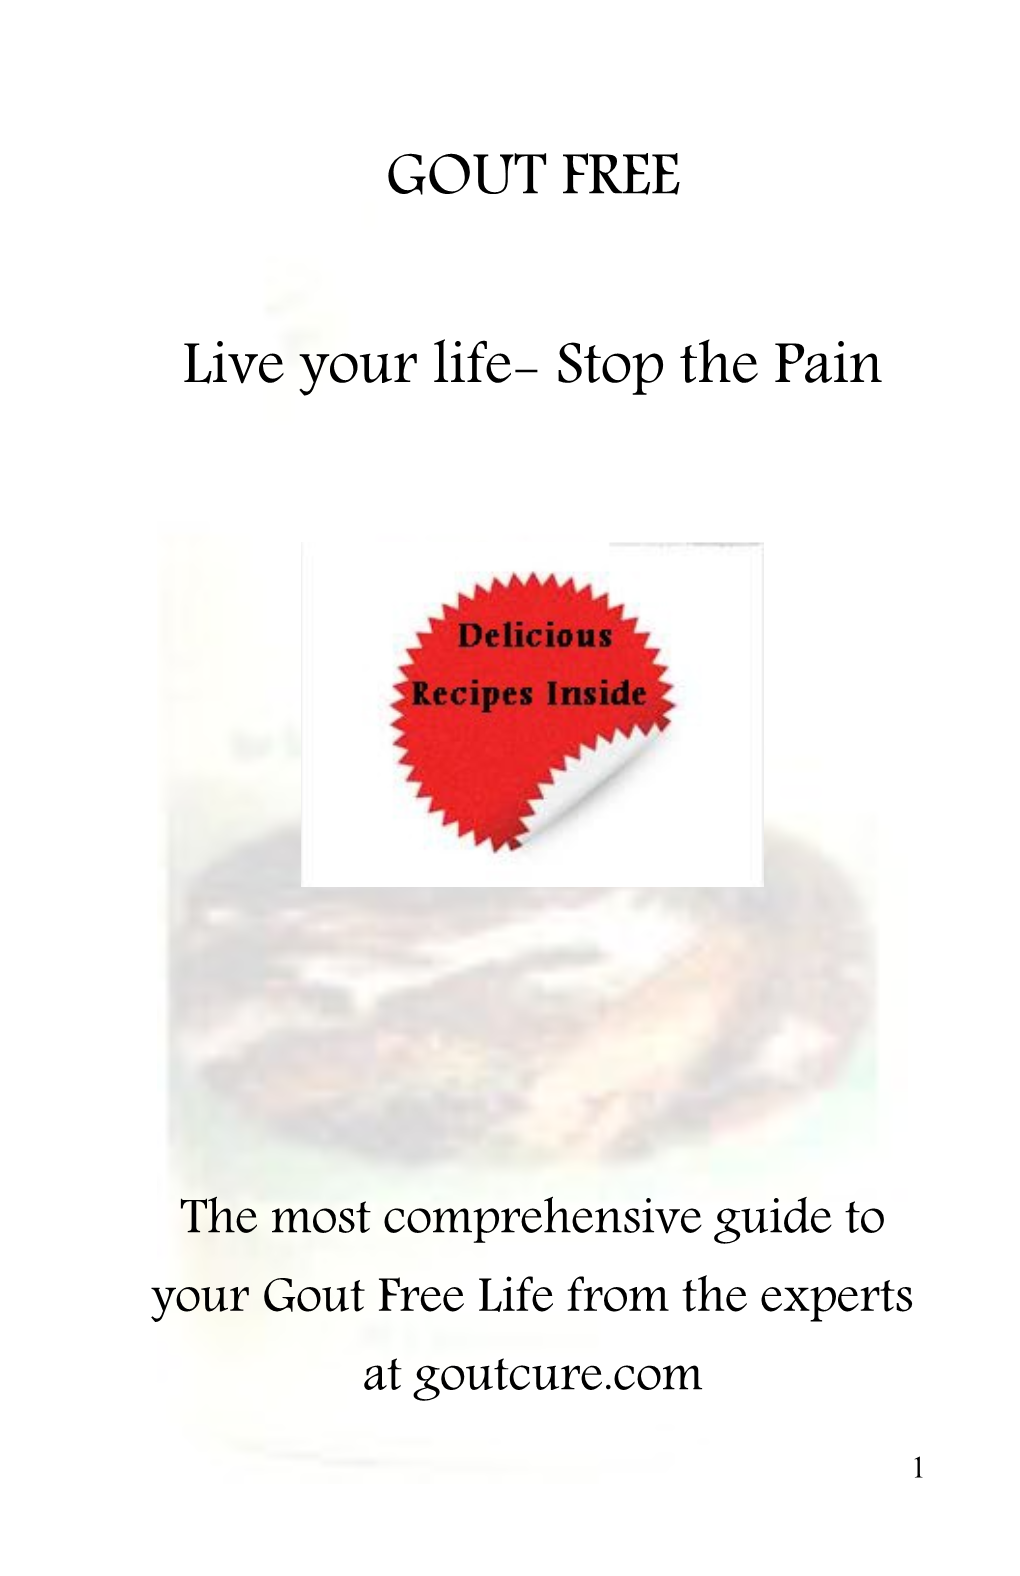 Live Your Life- Stop the Pain